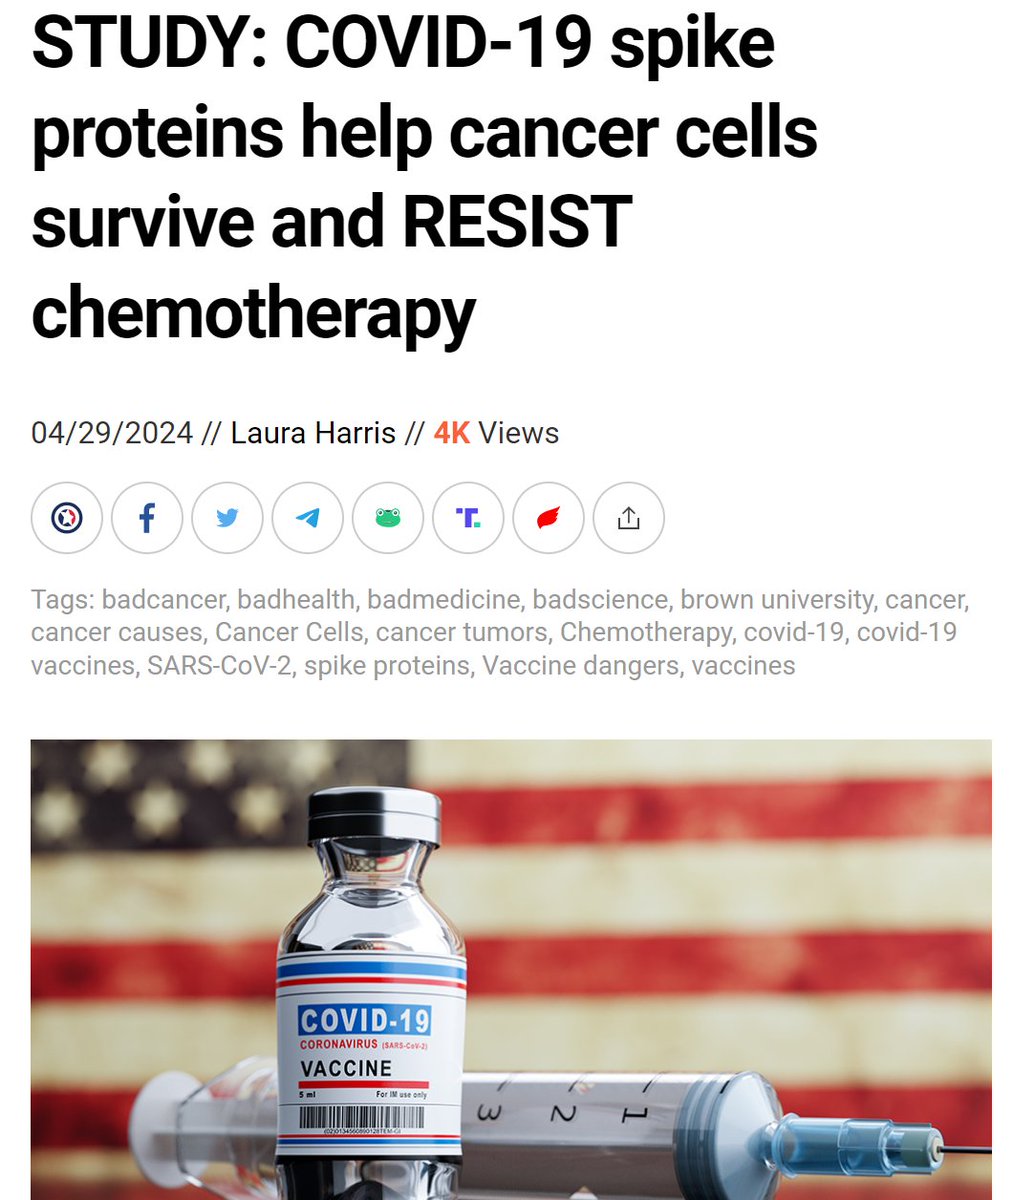 A new preprint cell study from Brown University has found that the spike protein from SARS-CoV-2, the virus responsible for the Wuhan coronavirus (COVID-19), helps cancer cells survive and resist chemotherapy. According to the study, led by Dr. Wafik El-Deiry, the director of…